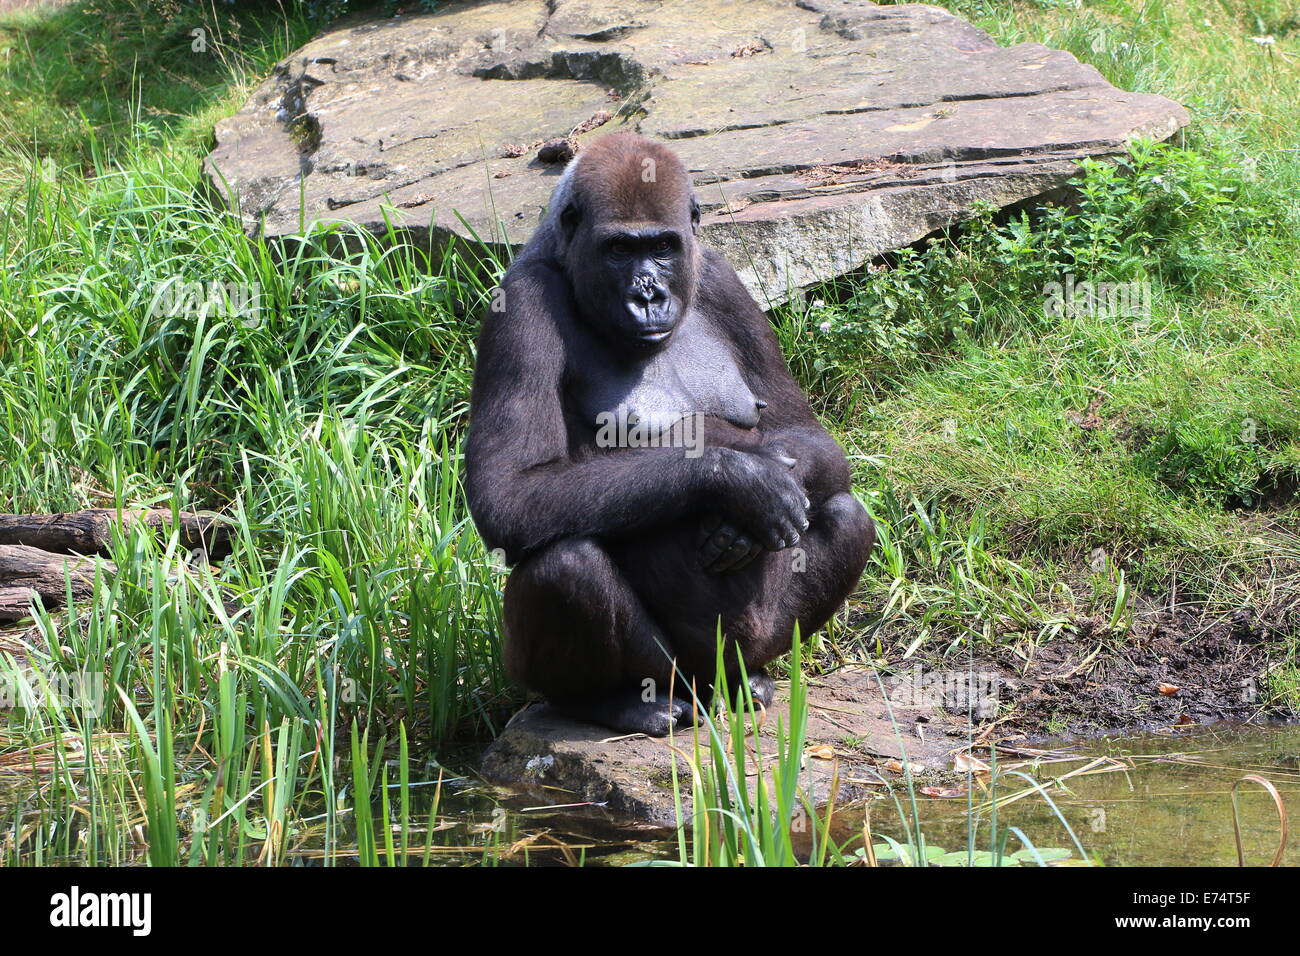 Female Western lowland gorilla at the water's edge Stock Photo